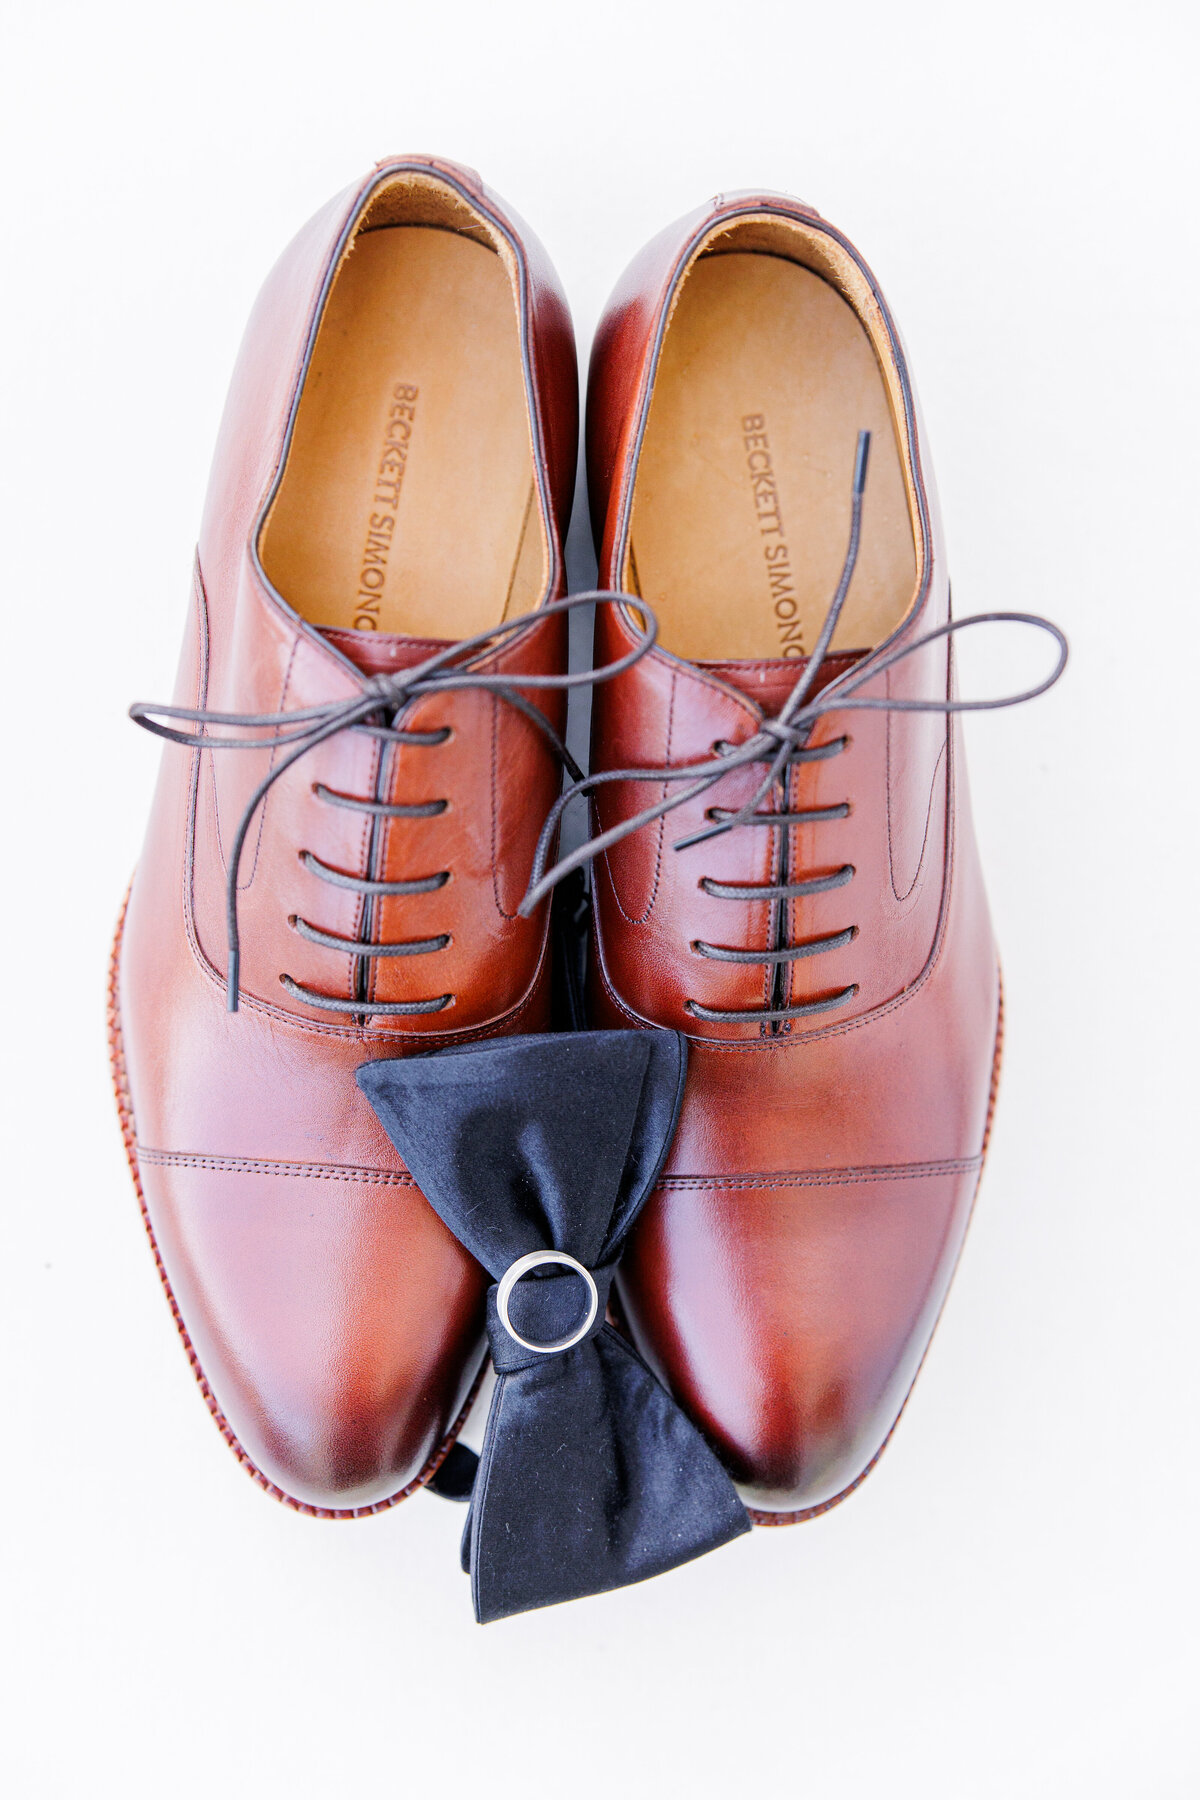 Groom's shoes with a bow tie and wedding band on top representing Boston wedding details